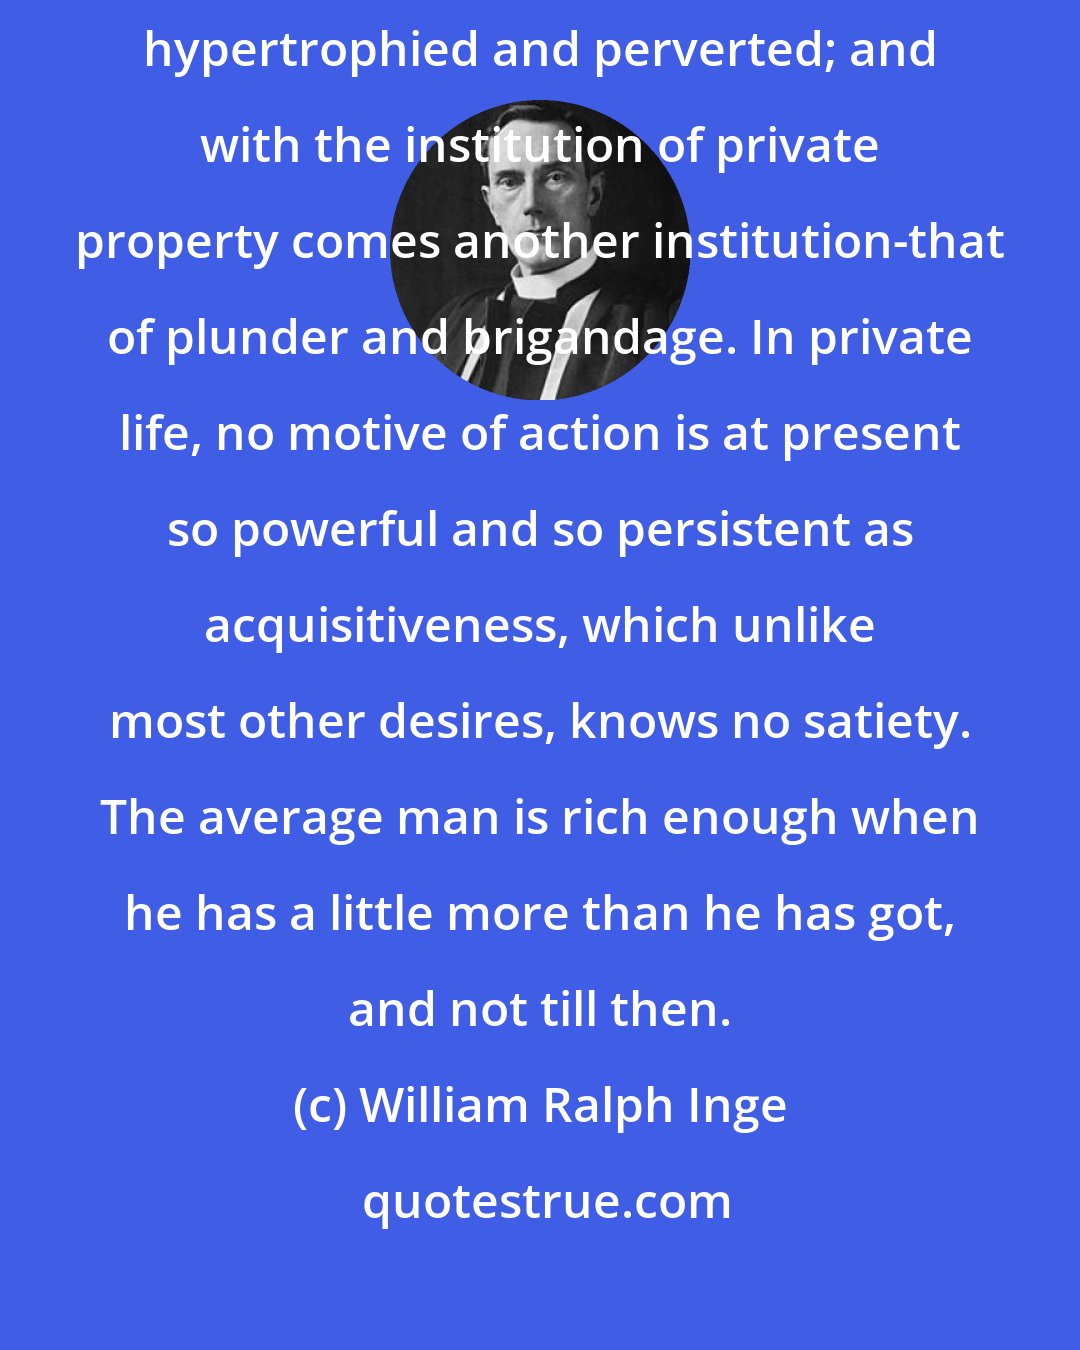 William Ralph Inge: But the instinct of hoarding, like all other instincts, tends to become hypertrophied and perverted; and with the institution of private property comes another institution-that of plunder and brigandage. In private life, no motive of action is at present so powerful and so persistent as acquisitiveness, which unlike most other desires, knows no satiety. The average man is rich enough when he has a little more than he has got, and not till then.